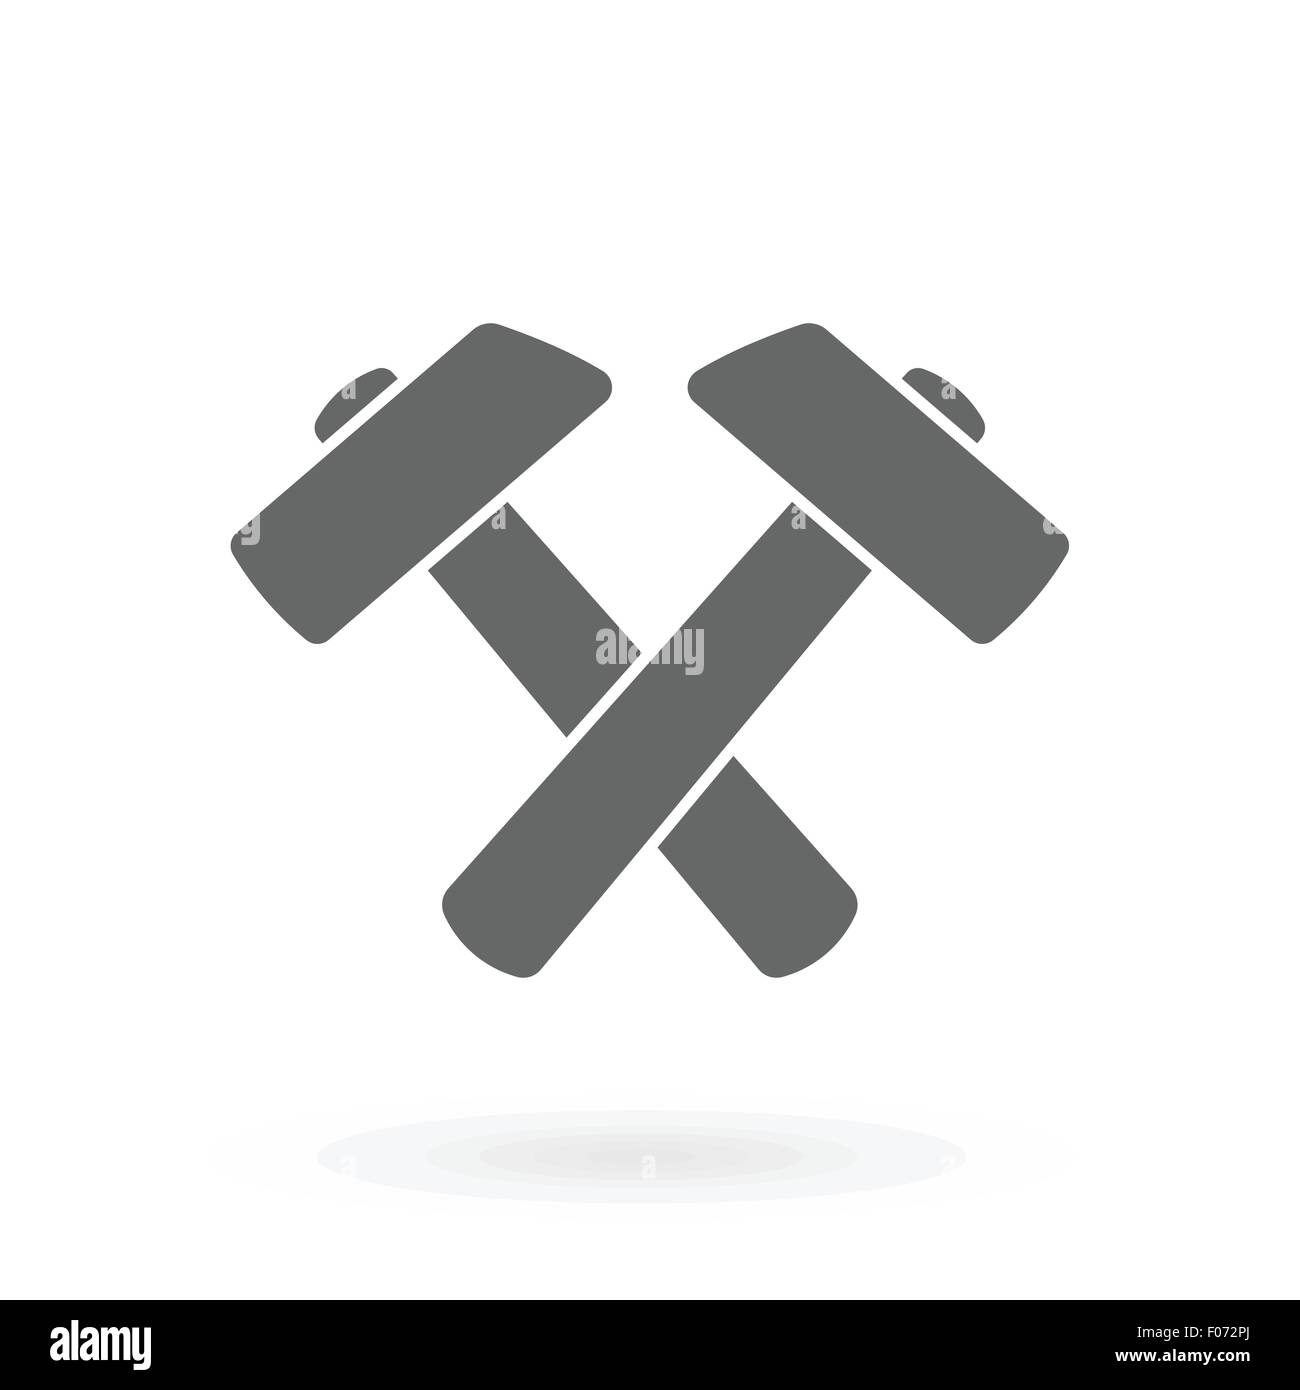 two hammer icon design as industrial symbol vector illustration. Stock Vector